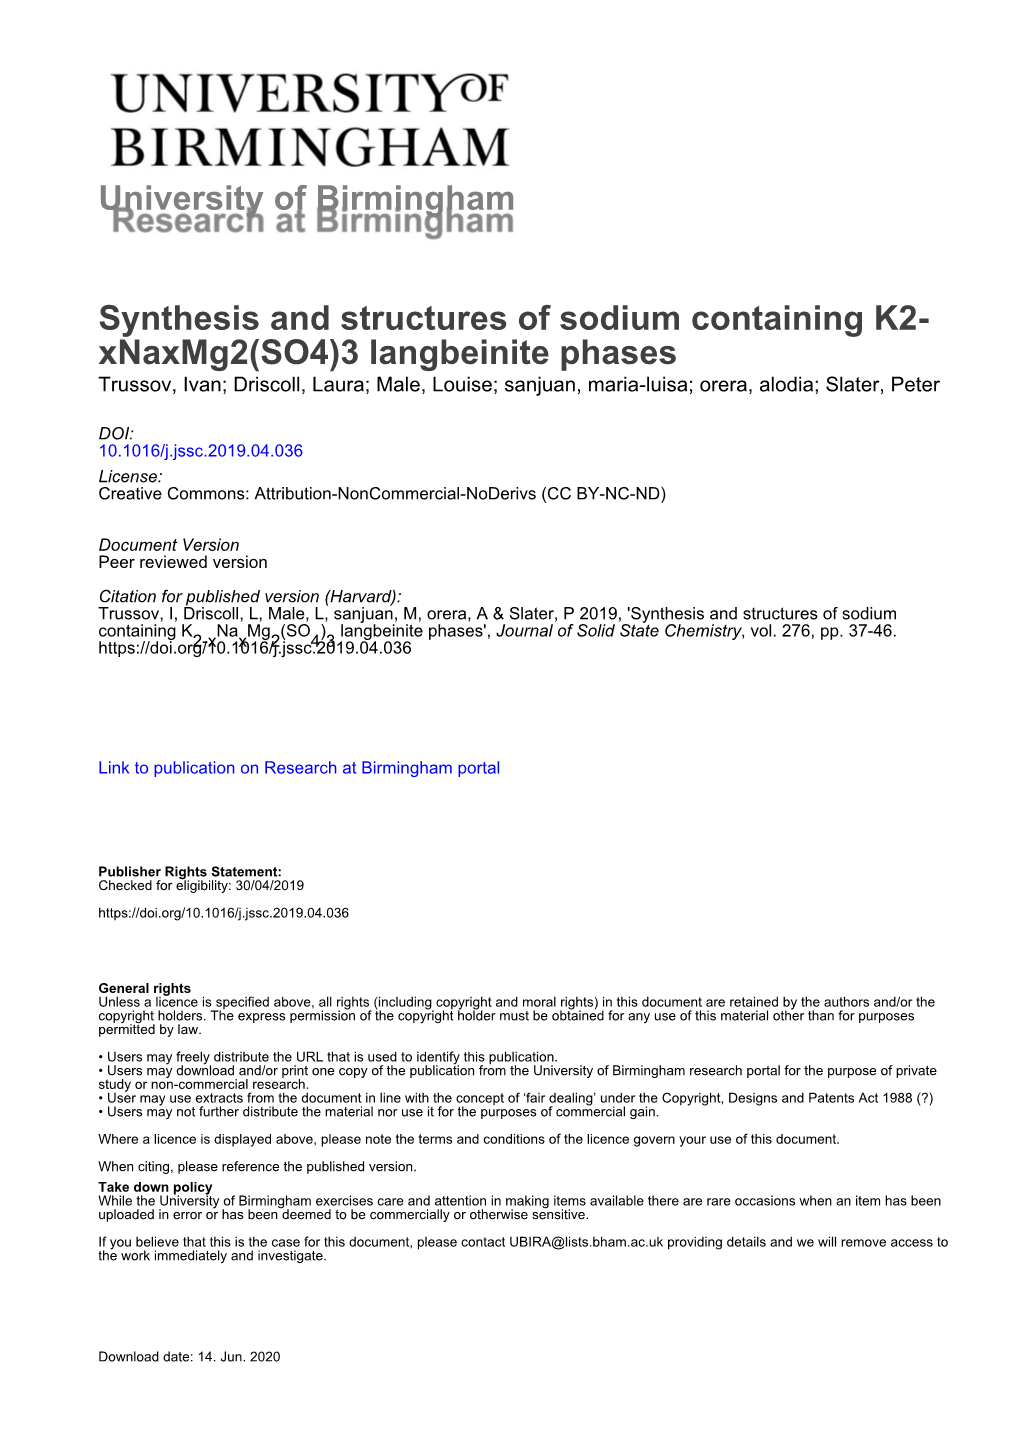 Synthesis and Structures of Sodium Containing K2-Xnaxmg2(SO4)3 Langbeinite Phases